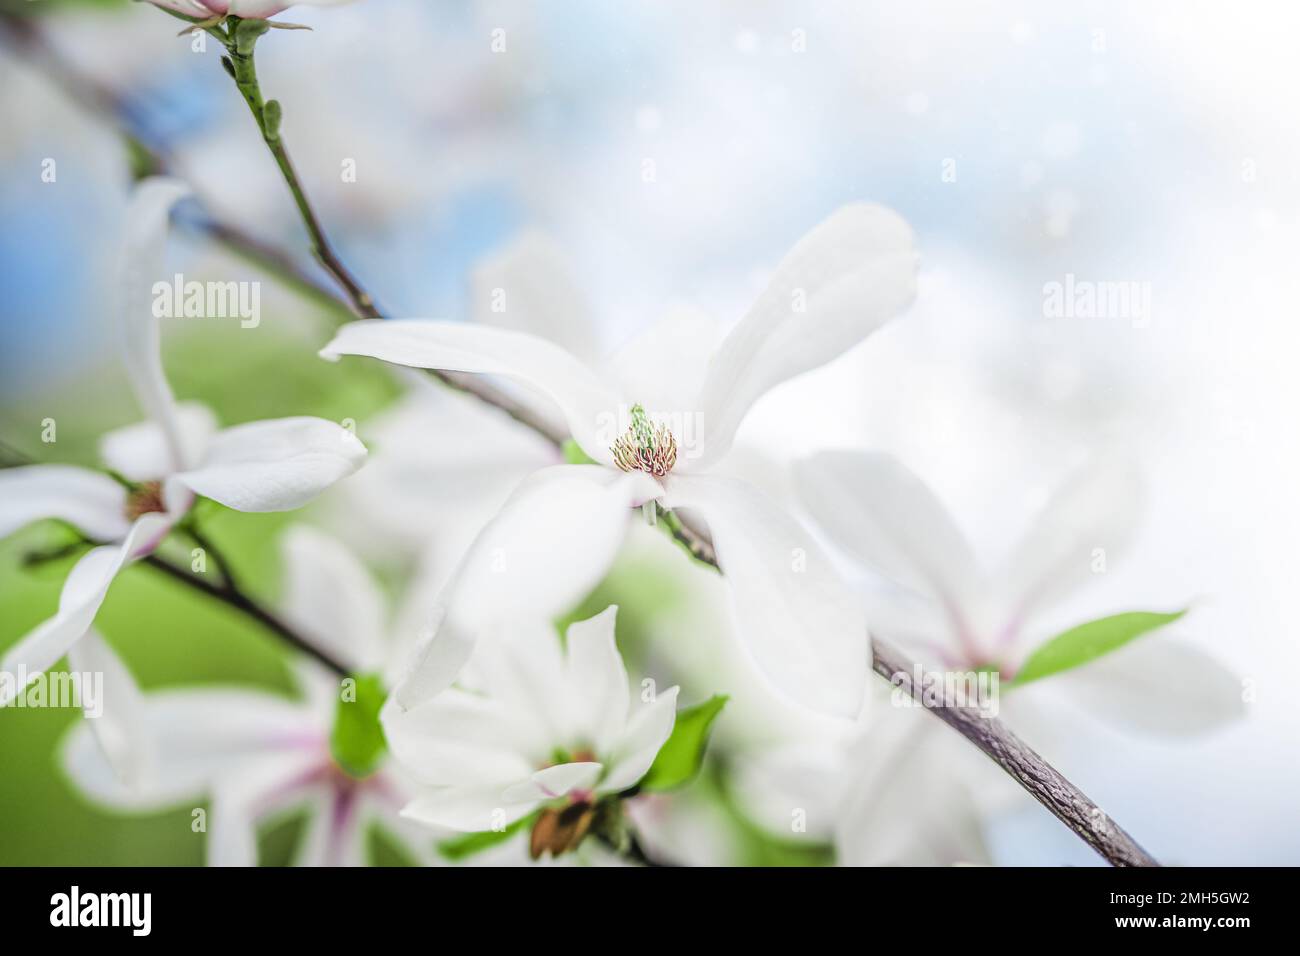 Blown beautiful magnolia flower on a tree with green leaves. Stock Photo